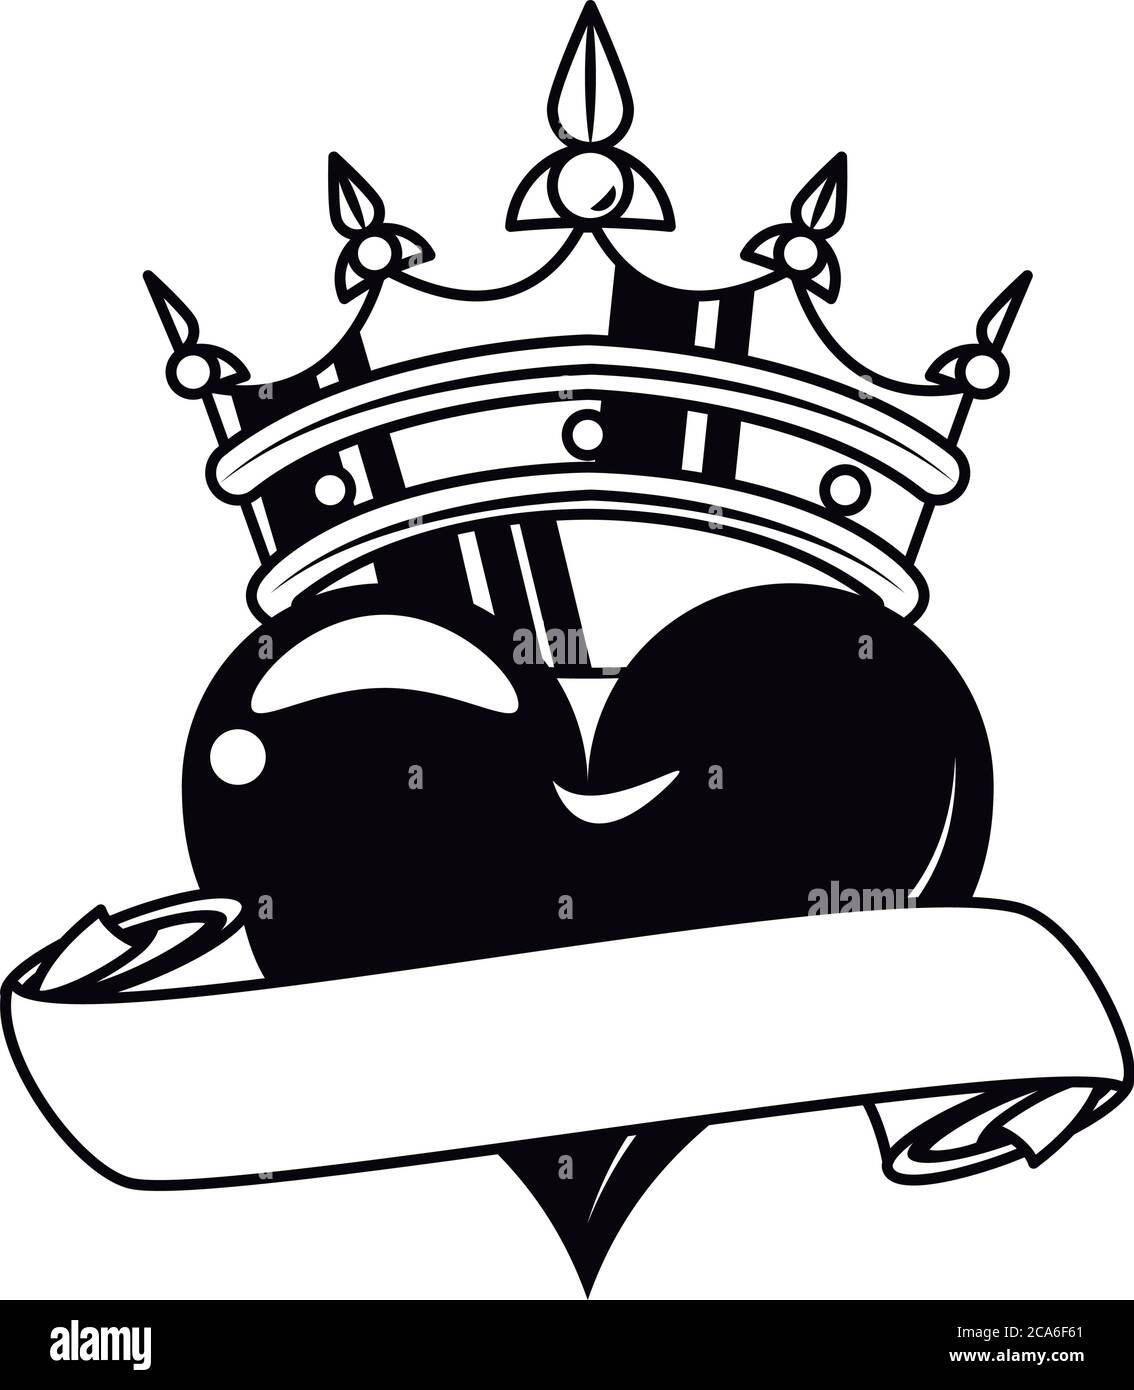 130+ Cartoon Of A Royal Crown Tattoo Designs Illustrations, Royalty-Free  Vector Graphics & Clip Art - iStock